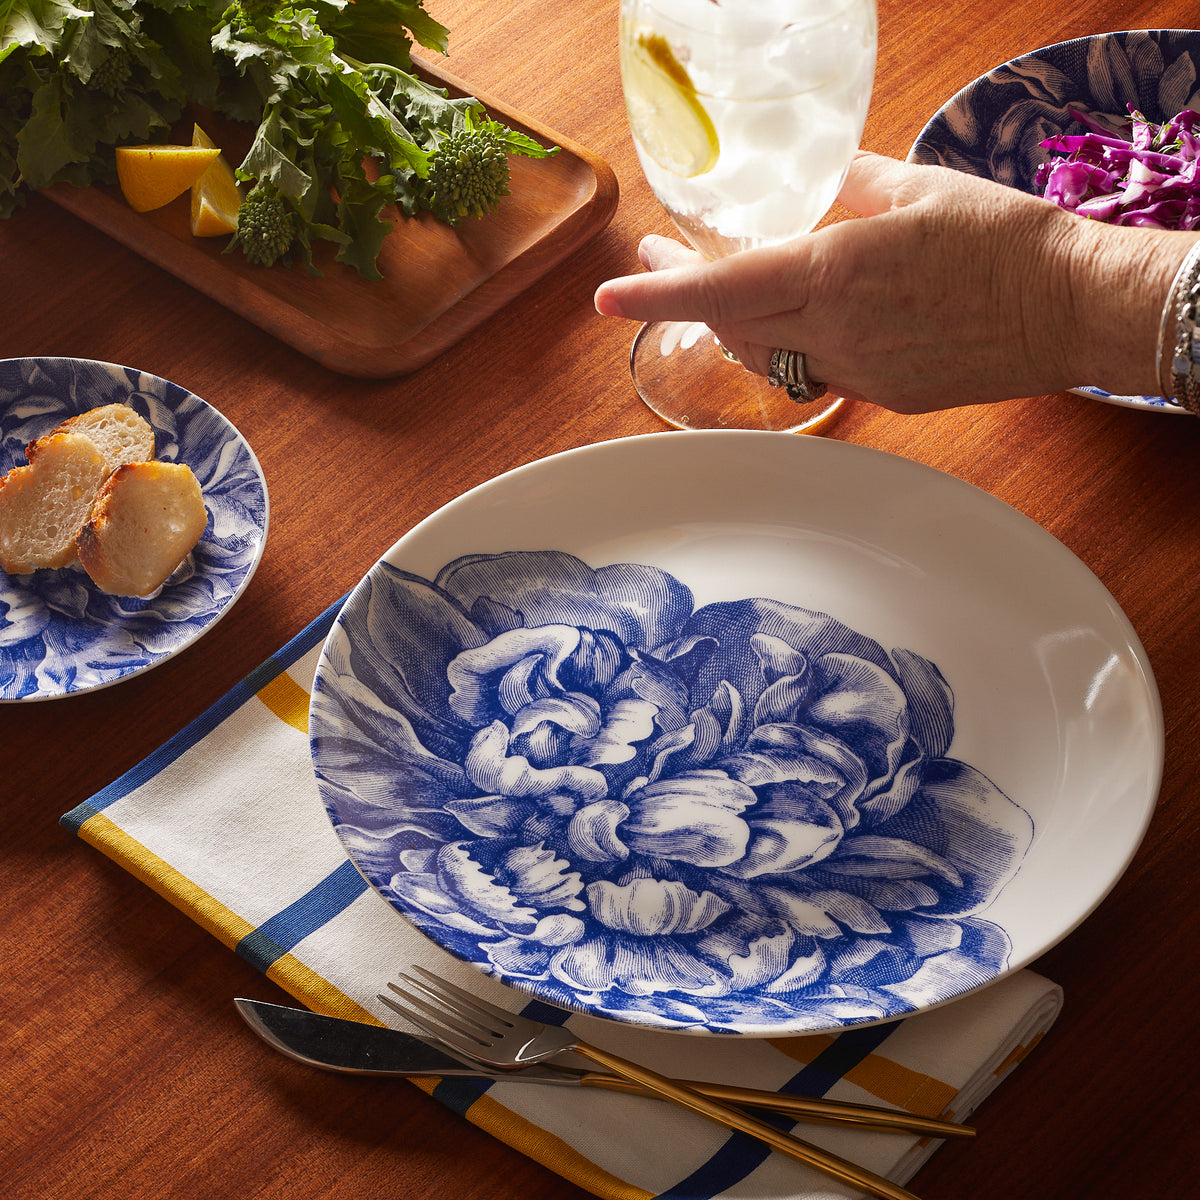 A person&#39;s hand placing a slice of pork tenderloin onto a premium porcelain Caskata Artisanal Home Peony Coupe Dinner Plate on a wooden table, with a drink and salad nearby.